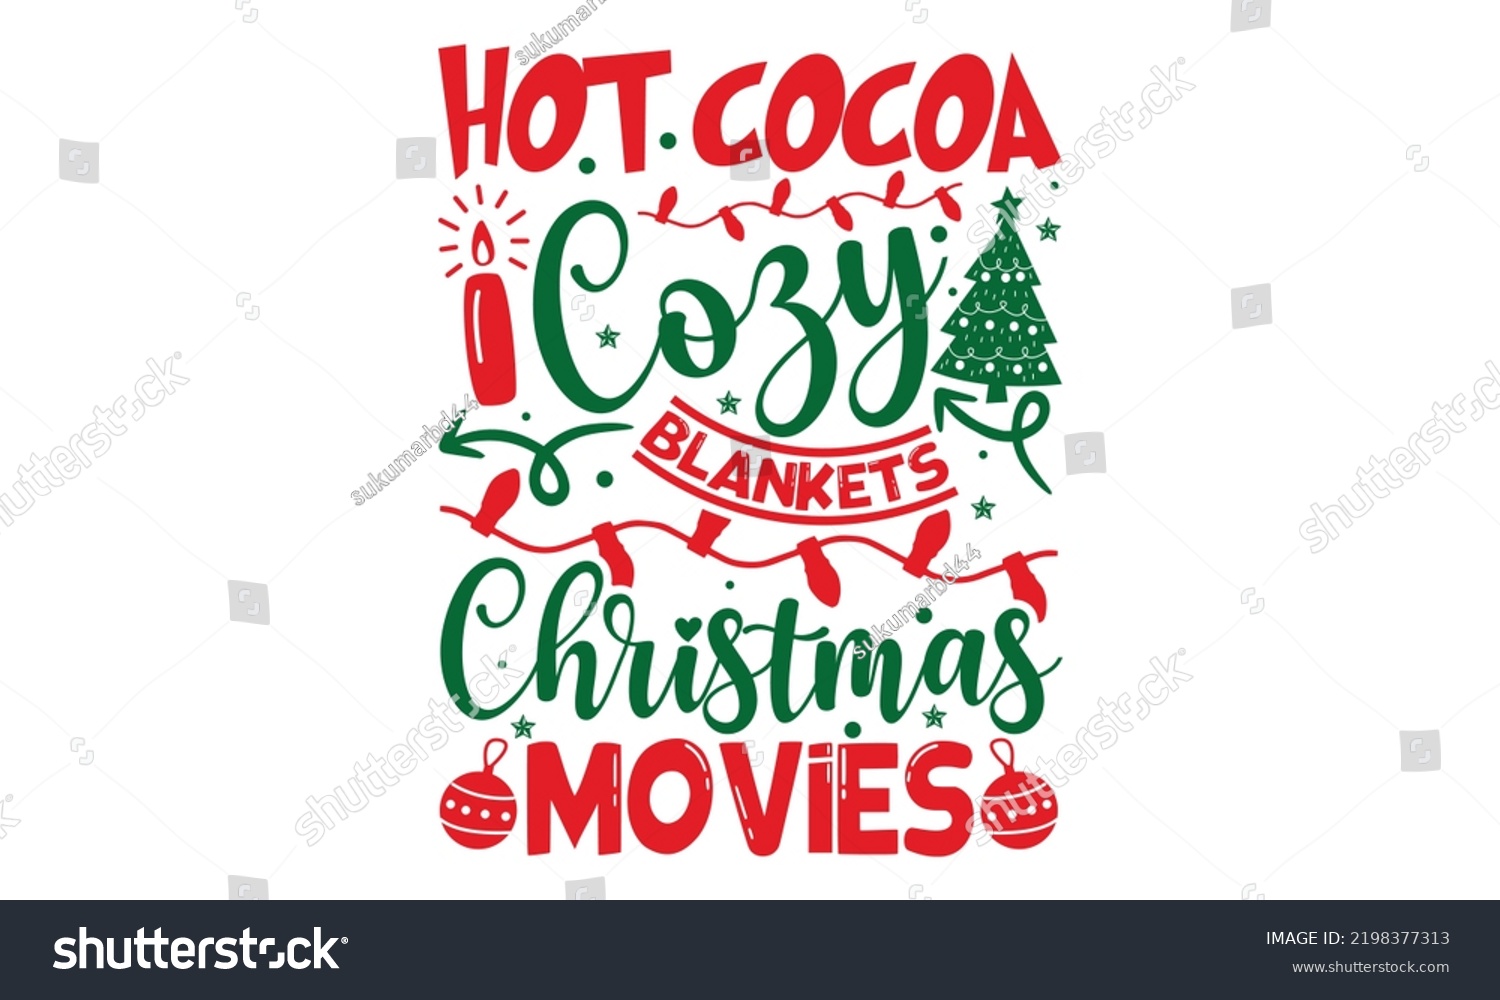 SVG of Hot Cocoa Cozy Blankets Christmas Movies - Christmas t-shirt design, Funny Quote EPS, Cut File For Cricut, Handmade calligraphy vector illustration, Hand written vector sign, SVG svg